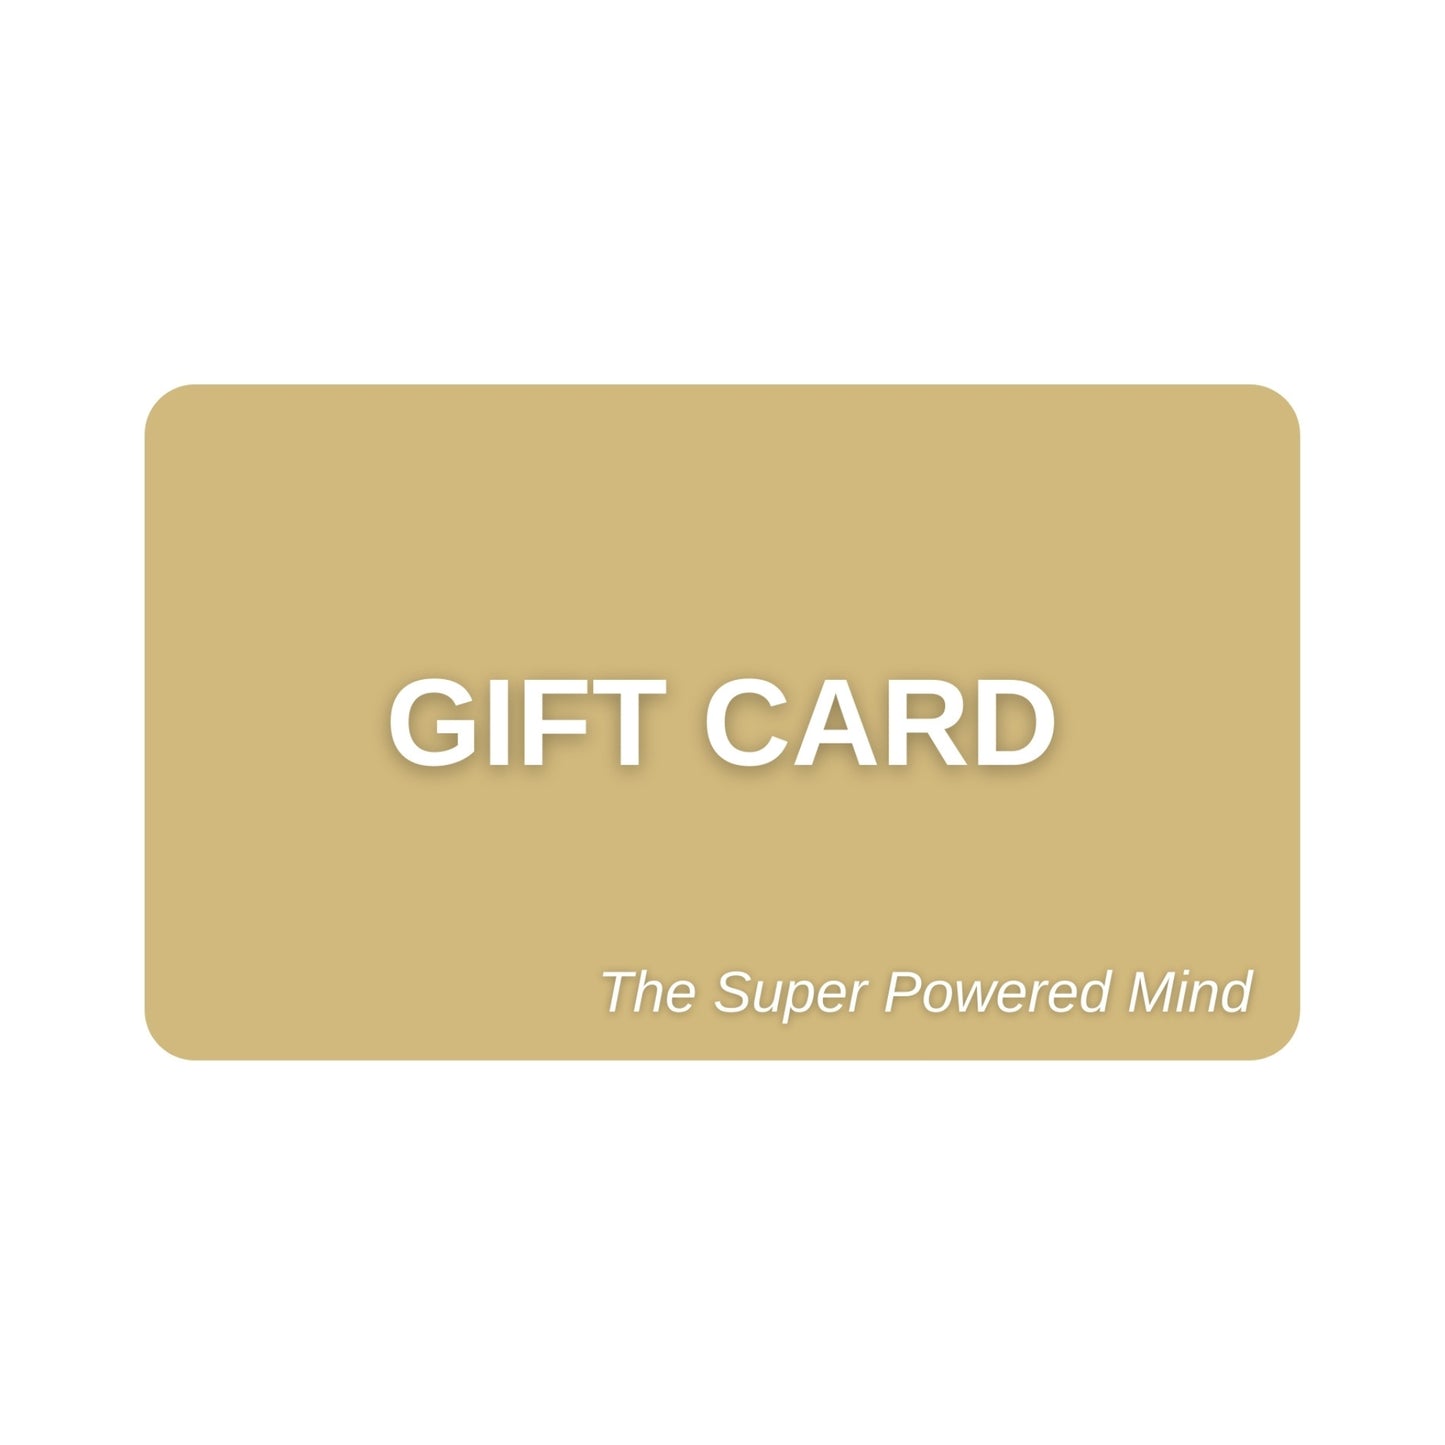 The Super Powered Mind Gift Card